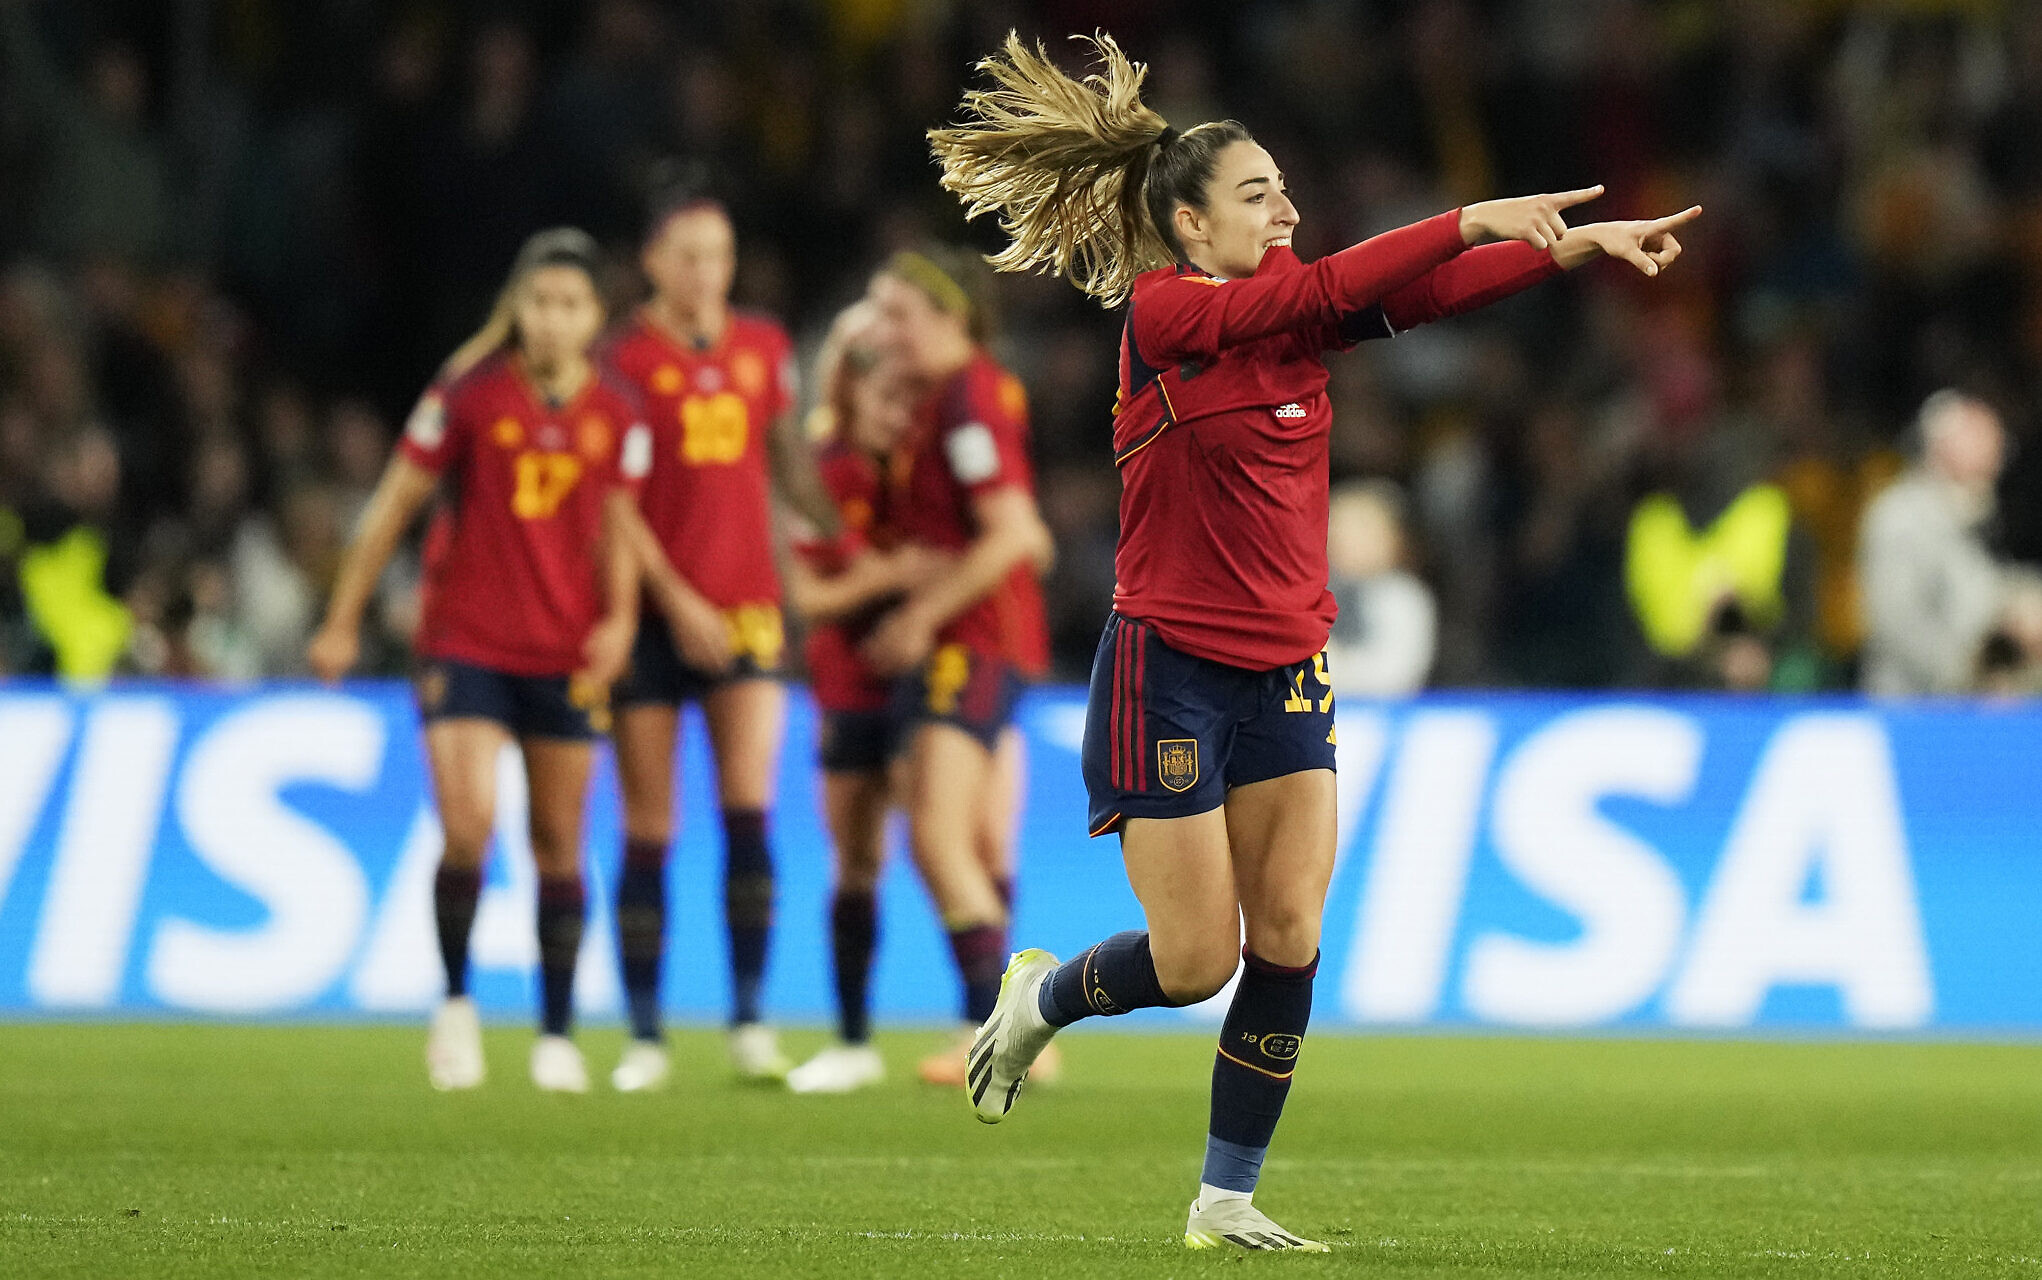 Women's World Cup Final: Spain Beats England to Win Its First